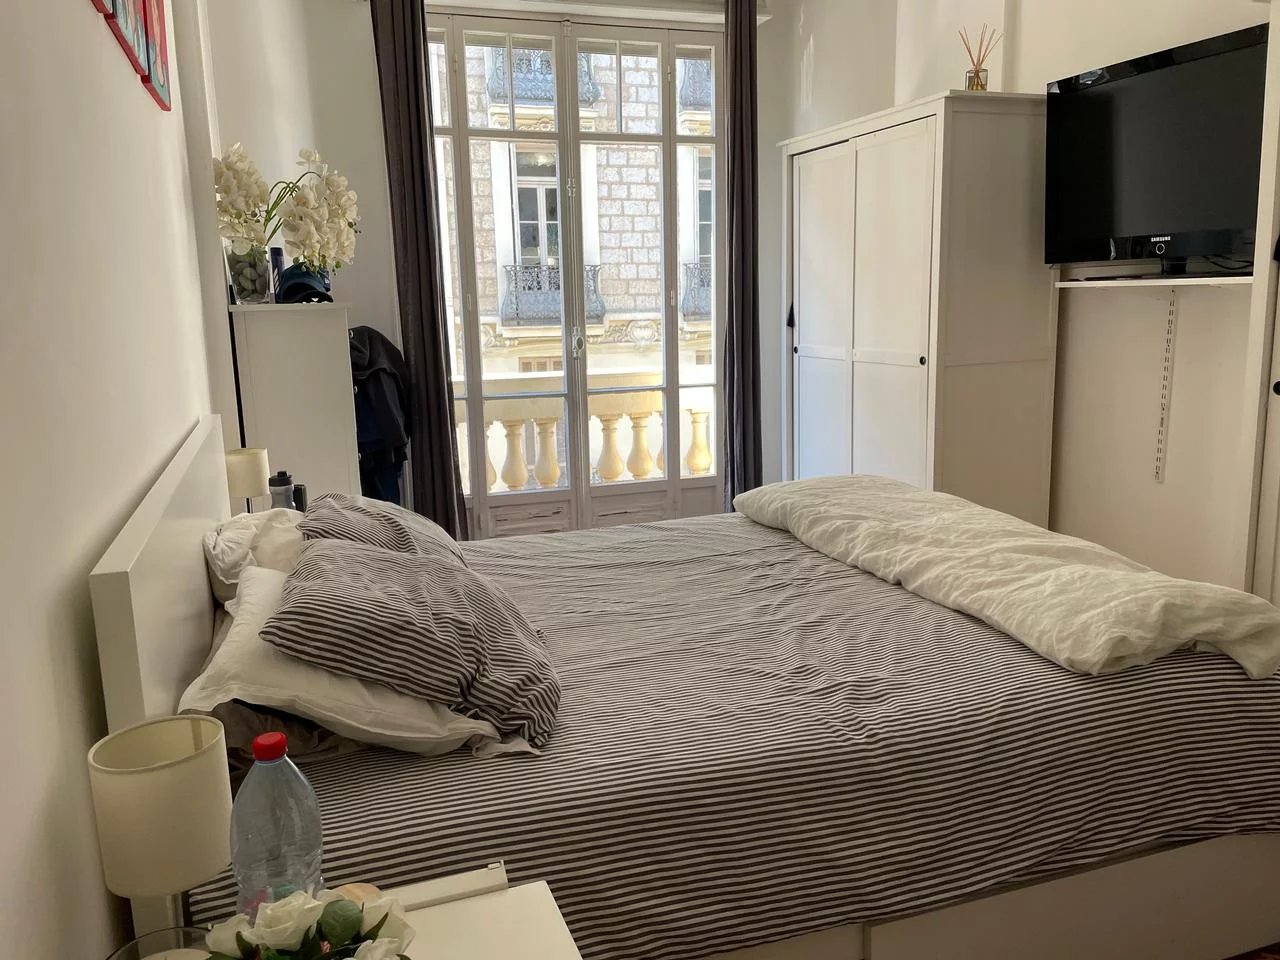 Appartement  5 Rooms 128m2  for sale  1 180 000 €